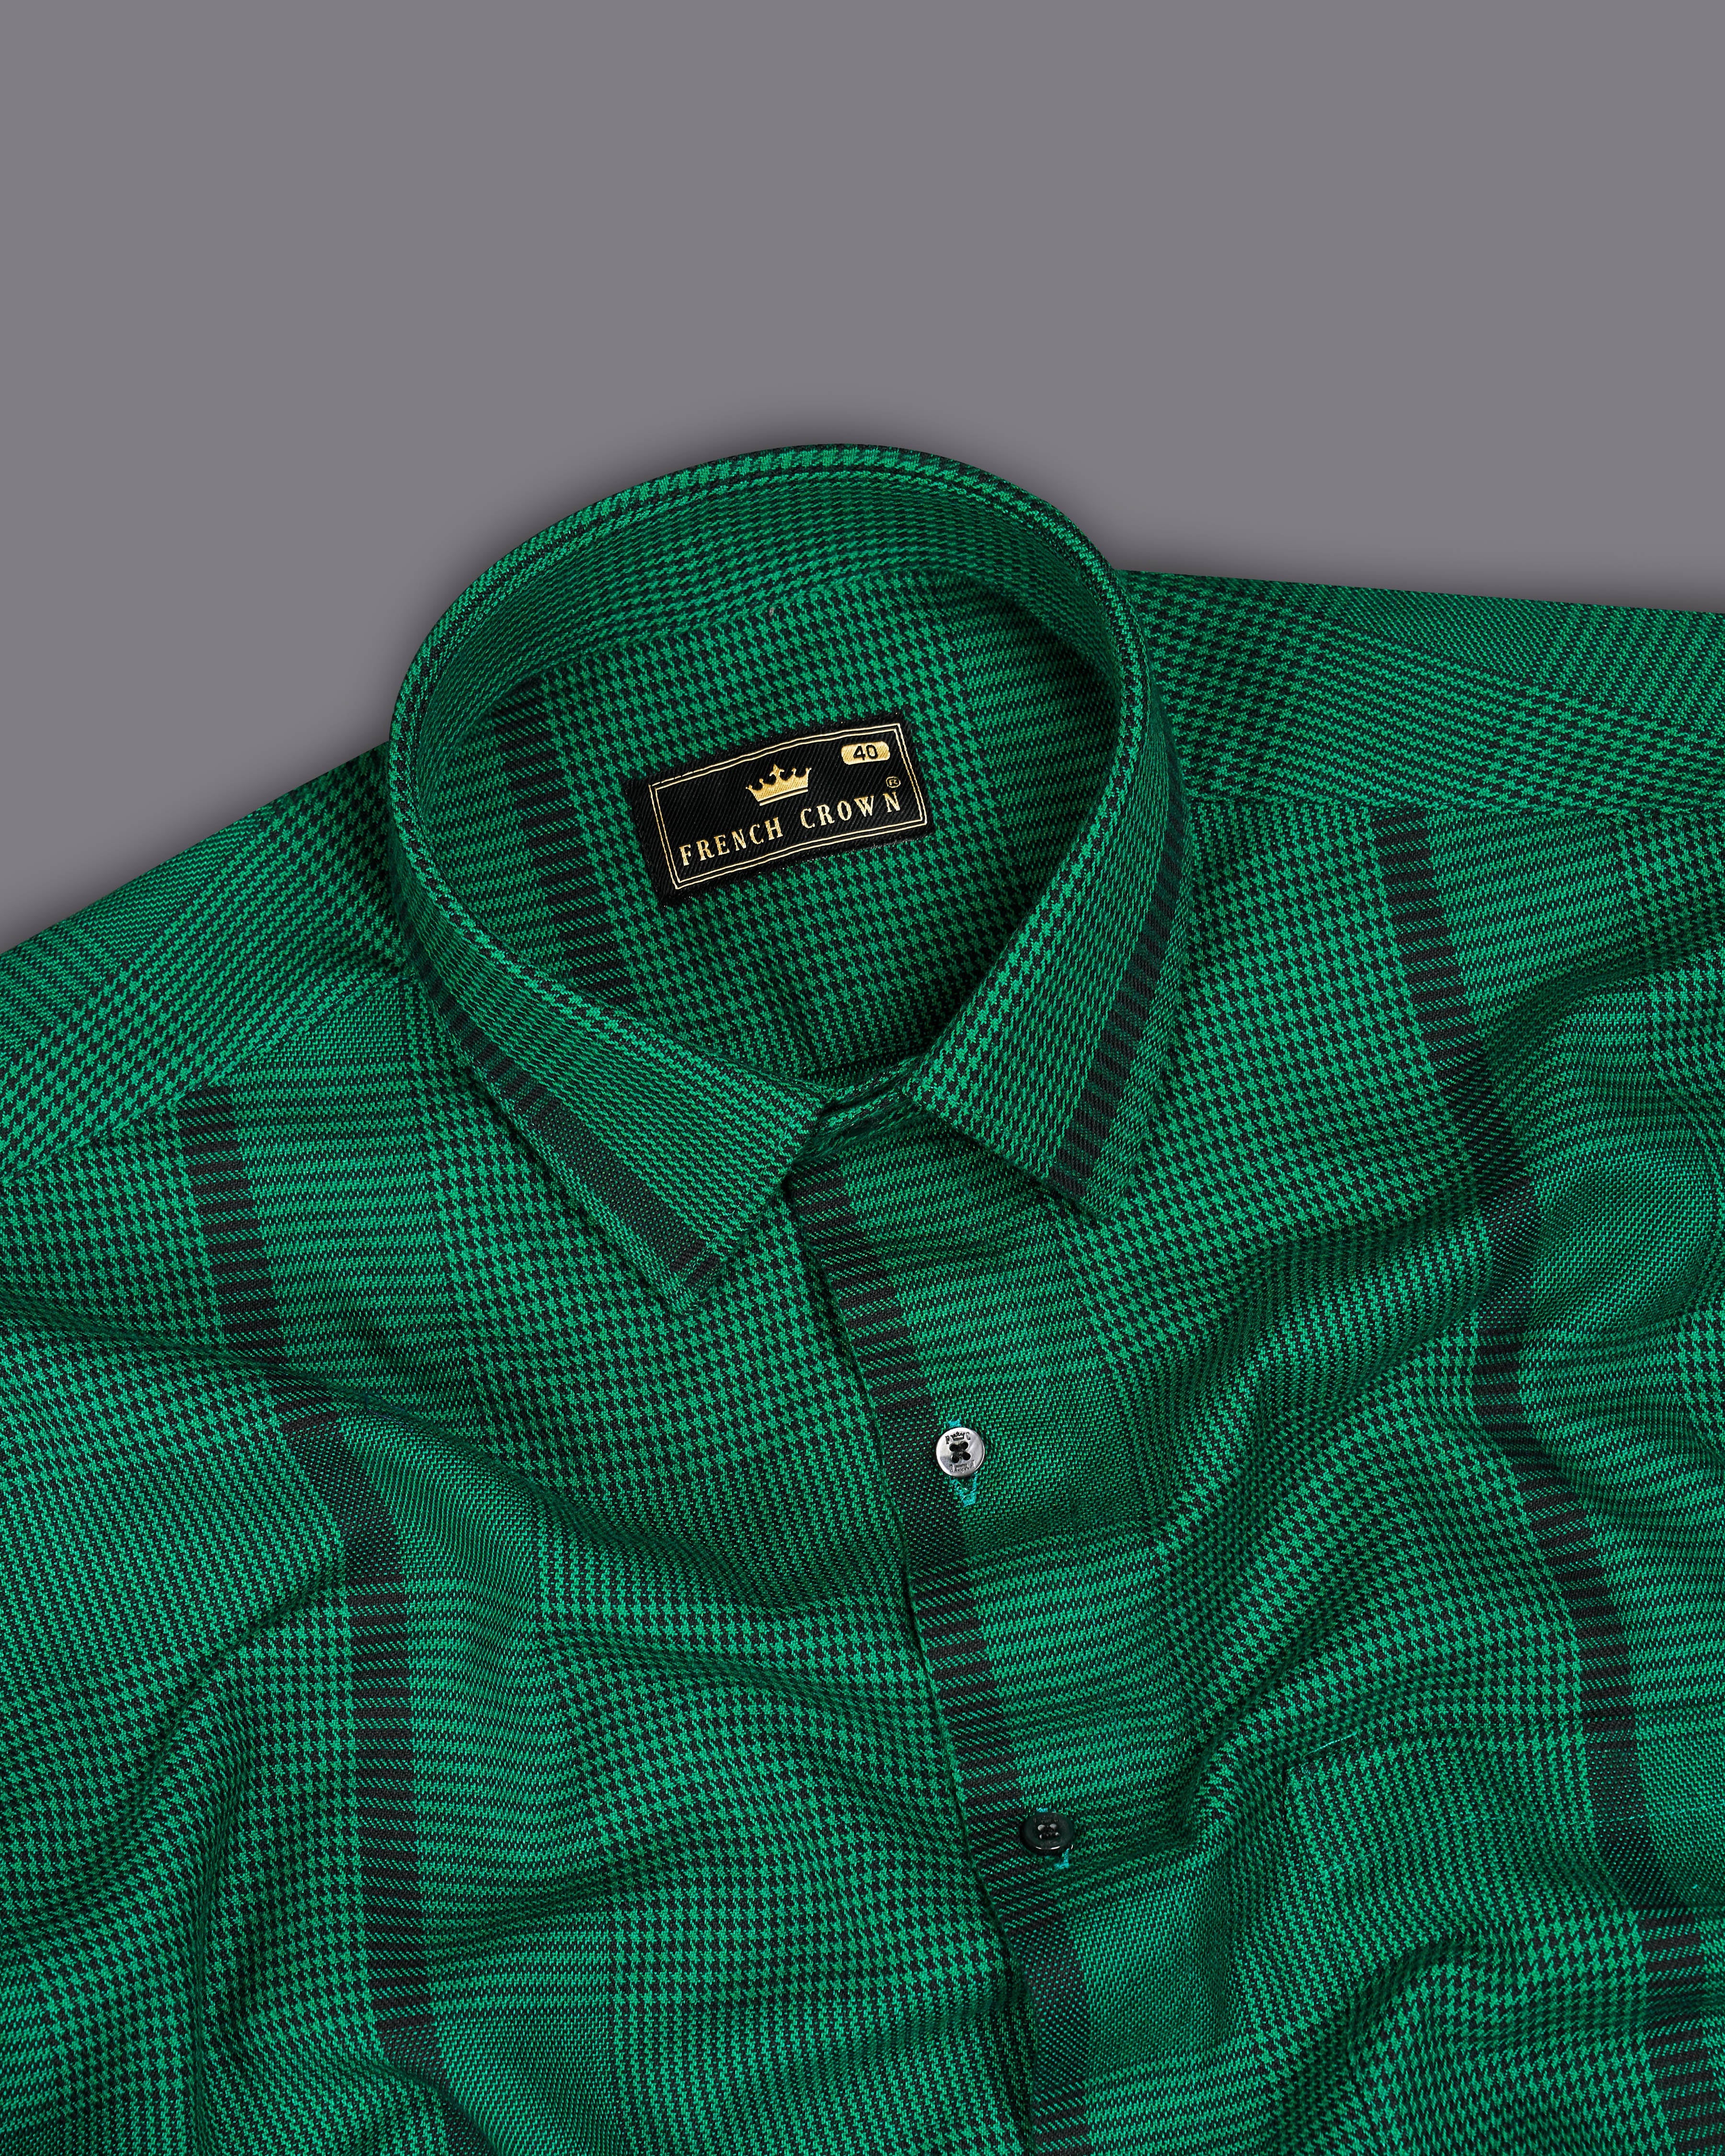 Spruce Green with Black Houndstooth Textured Overshirt 9148-OS-BLK-38,9148-OS-BLK-H-38,9148-OS-BLK-39,9148-OS-BLK-H-39,9148-OS-BLK-40,9148-OS-BLK-H-40,9148-OS-BLK-42,9148-OS-BLK-H-42,9148-OS-BLK-44,9148-OS-BLK-H-44,9148-OS-BLK-46,9148-OS-BLK-H-46,9148-OS-BLK-48,9148-OS-BLK-H-48,9148-OS-BLK-50,9148-OS-BLK-H-50,9148-OS-BLK-52,9148-OS-BLK-H-52